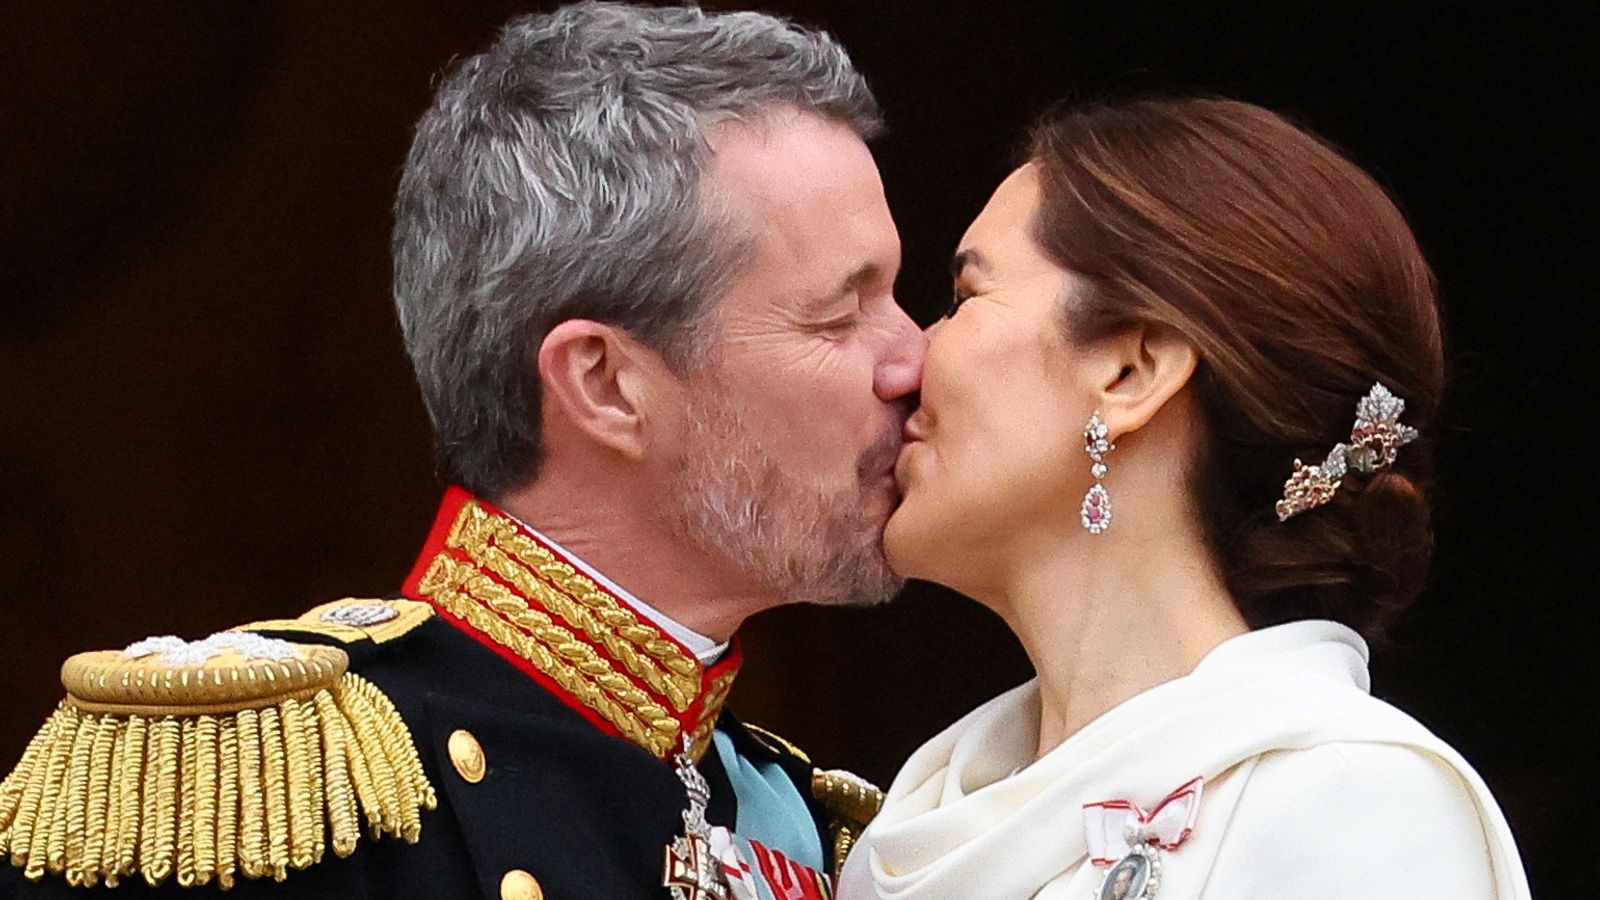 Princess Mary of Denmark: Latest News and pictures - HELLO!